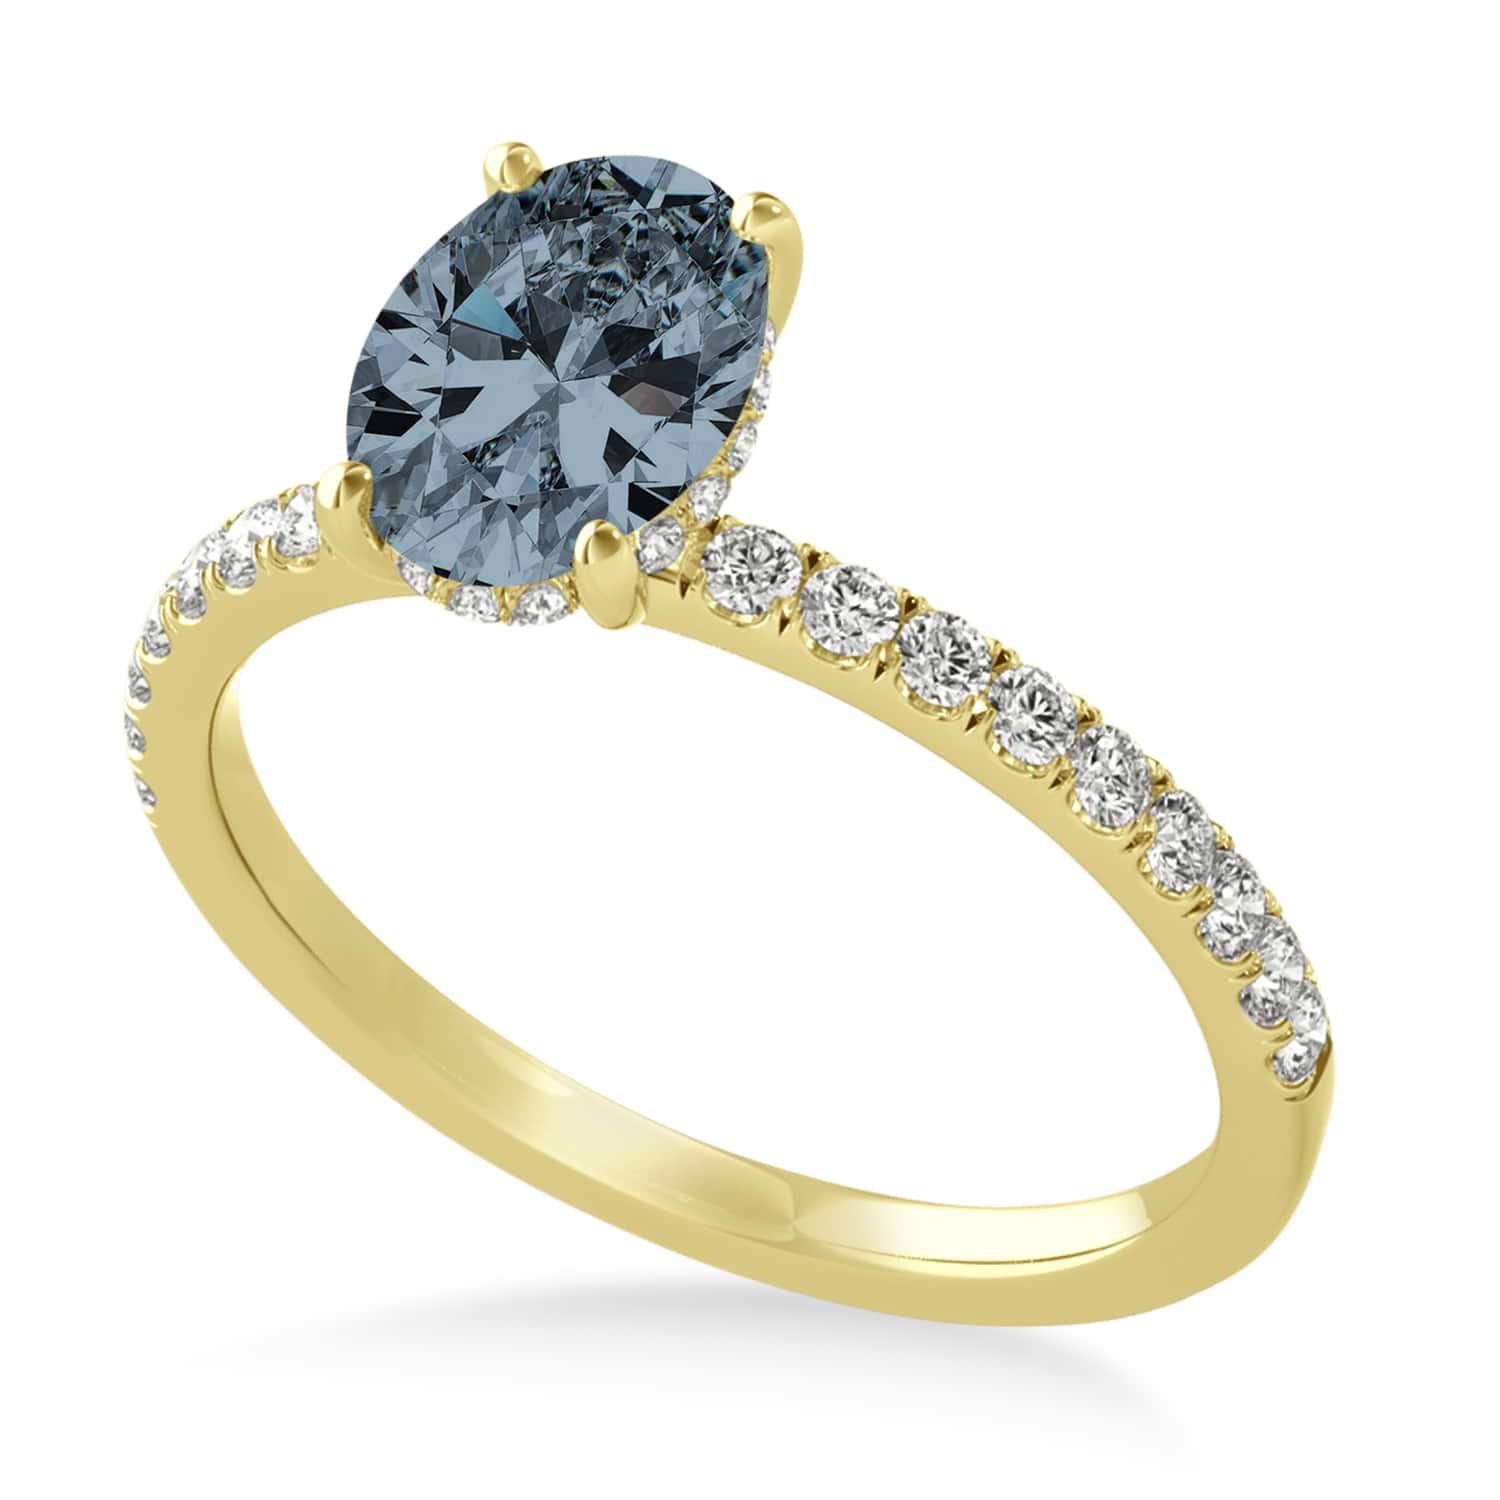 Oval Gray Spinel & Diamond Single Row Hidden Halo Engagement Ring 14k Yellow Gold (0.68ct)